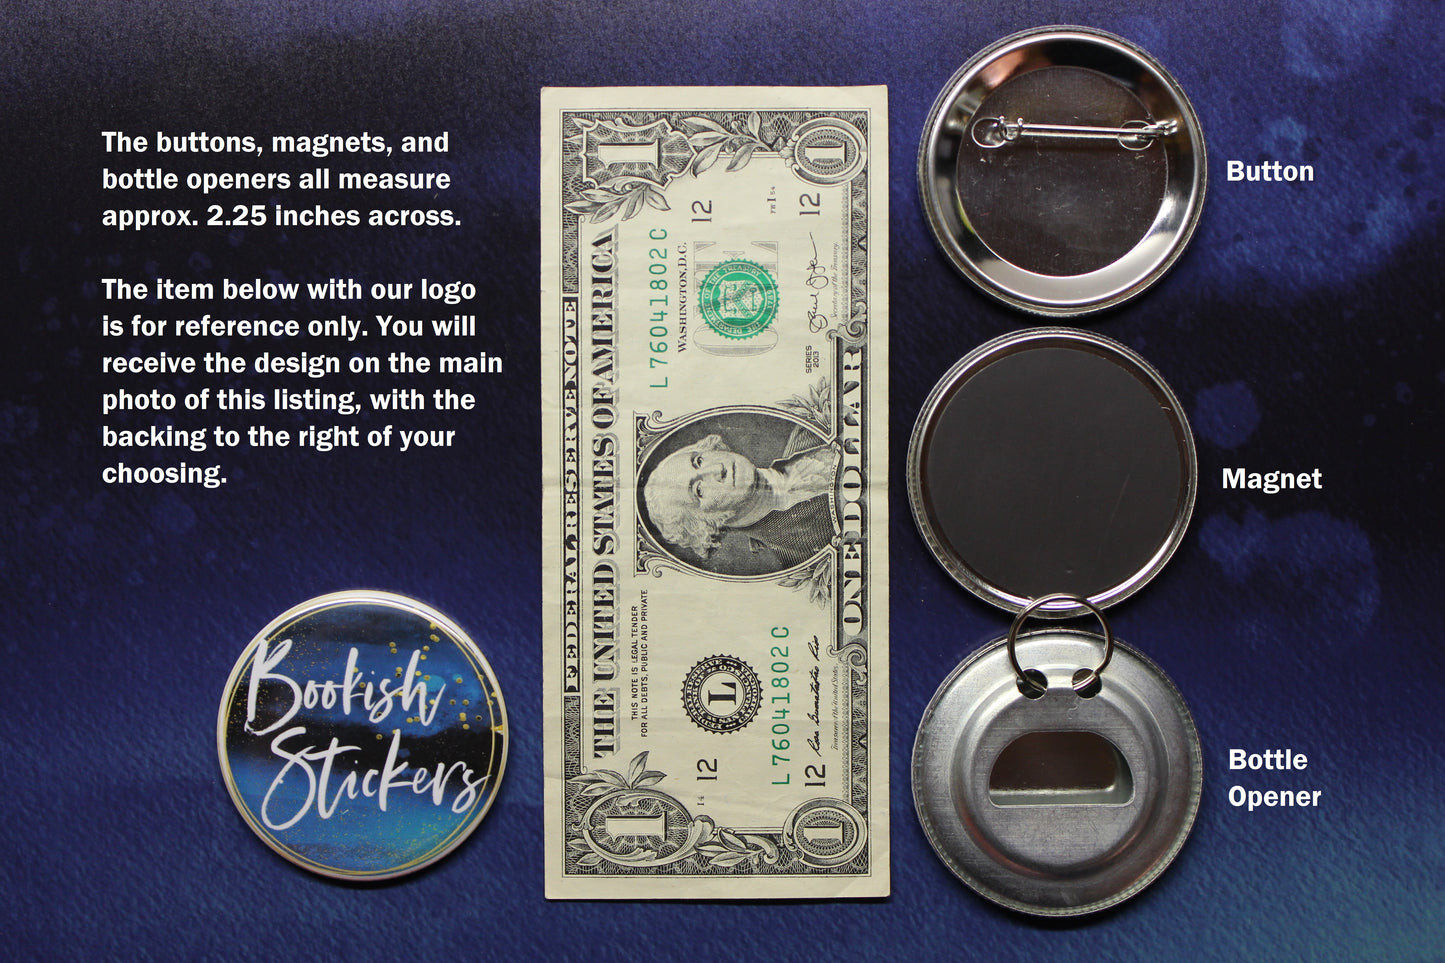 RBG Reading Shaped My Dreams Button Magnet or Bottle Opener